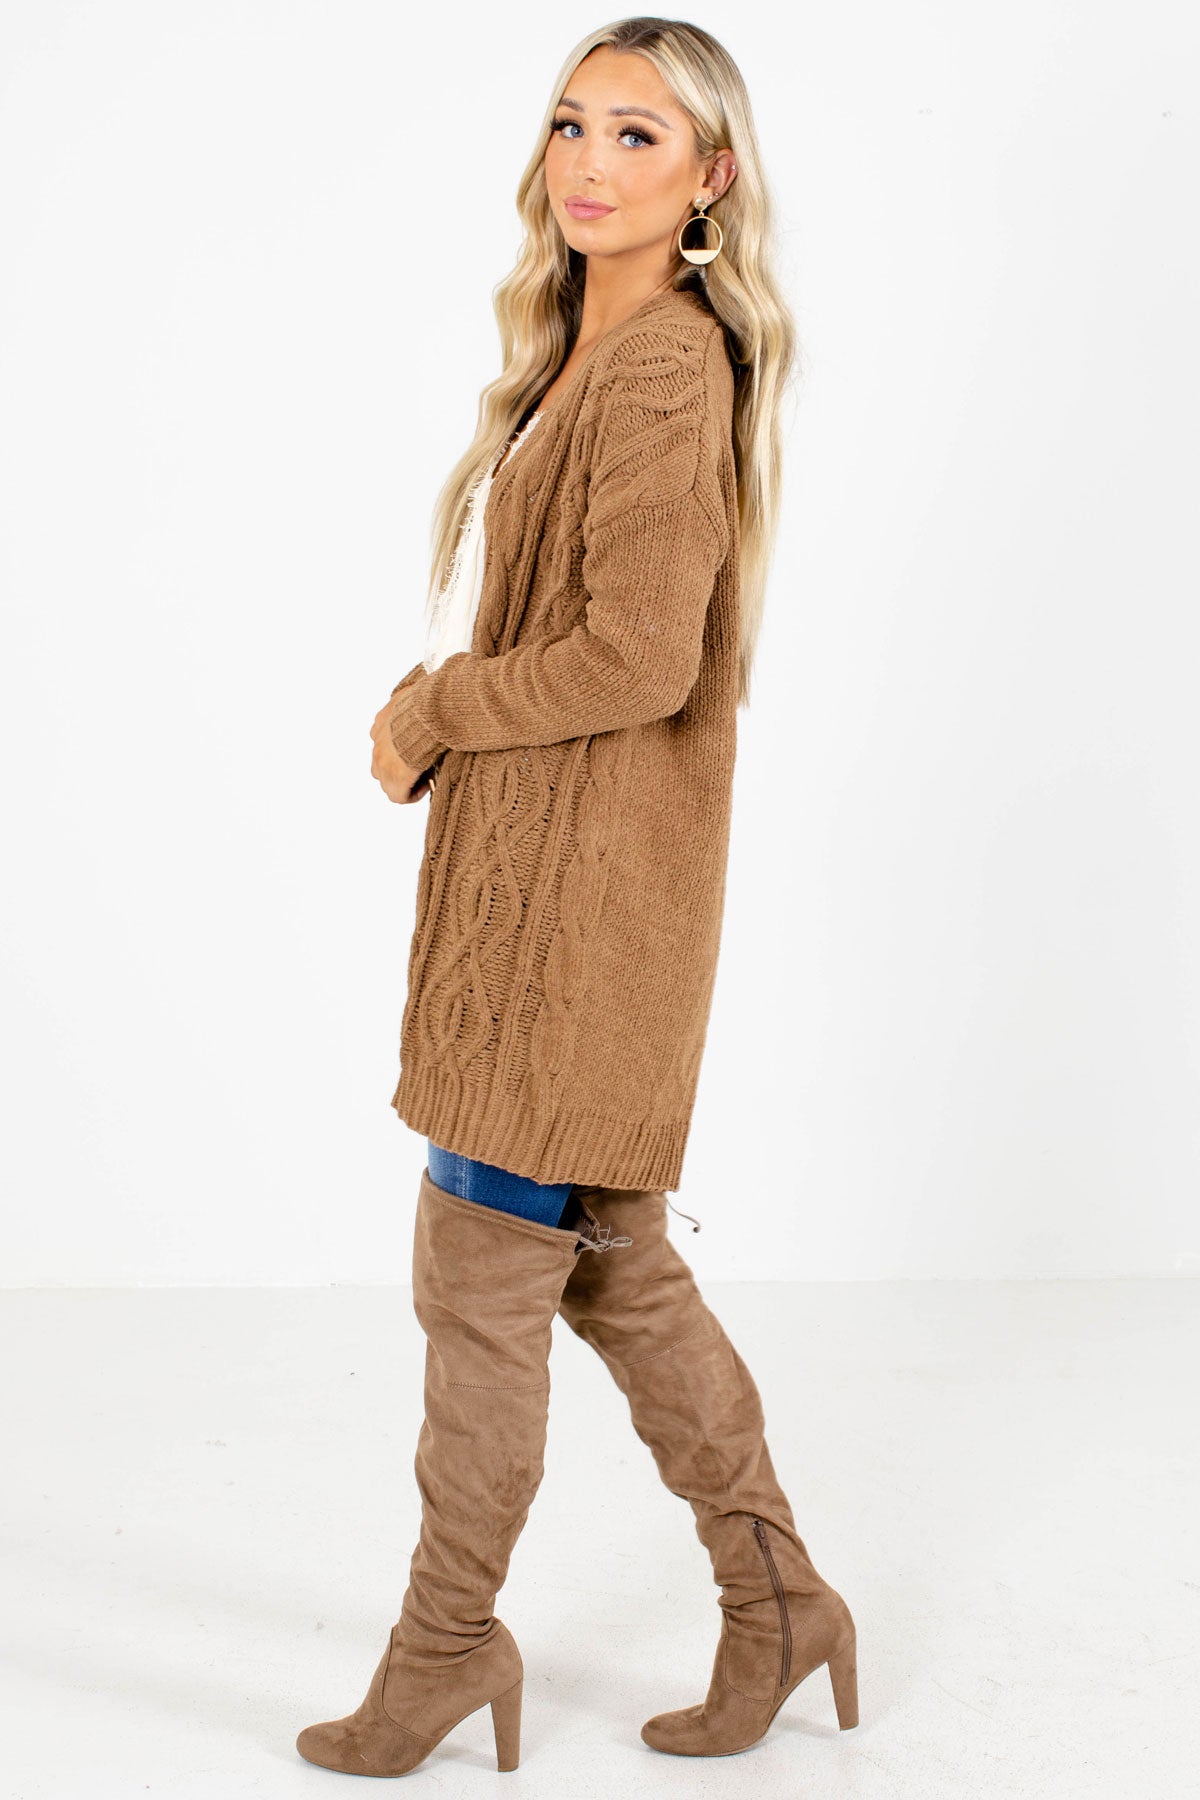 Brown Affordable Online Boutique Clothing for Women